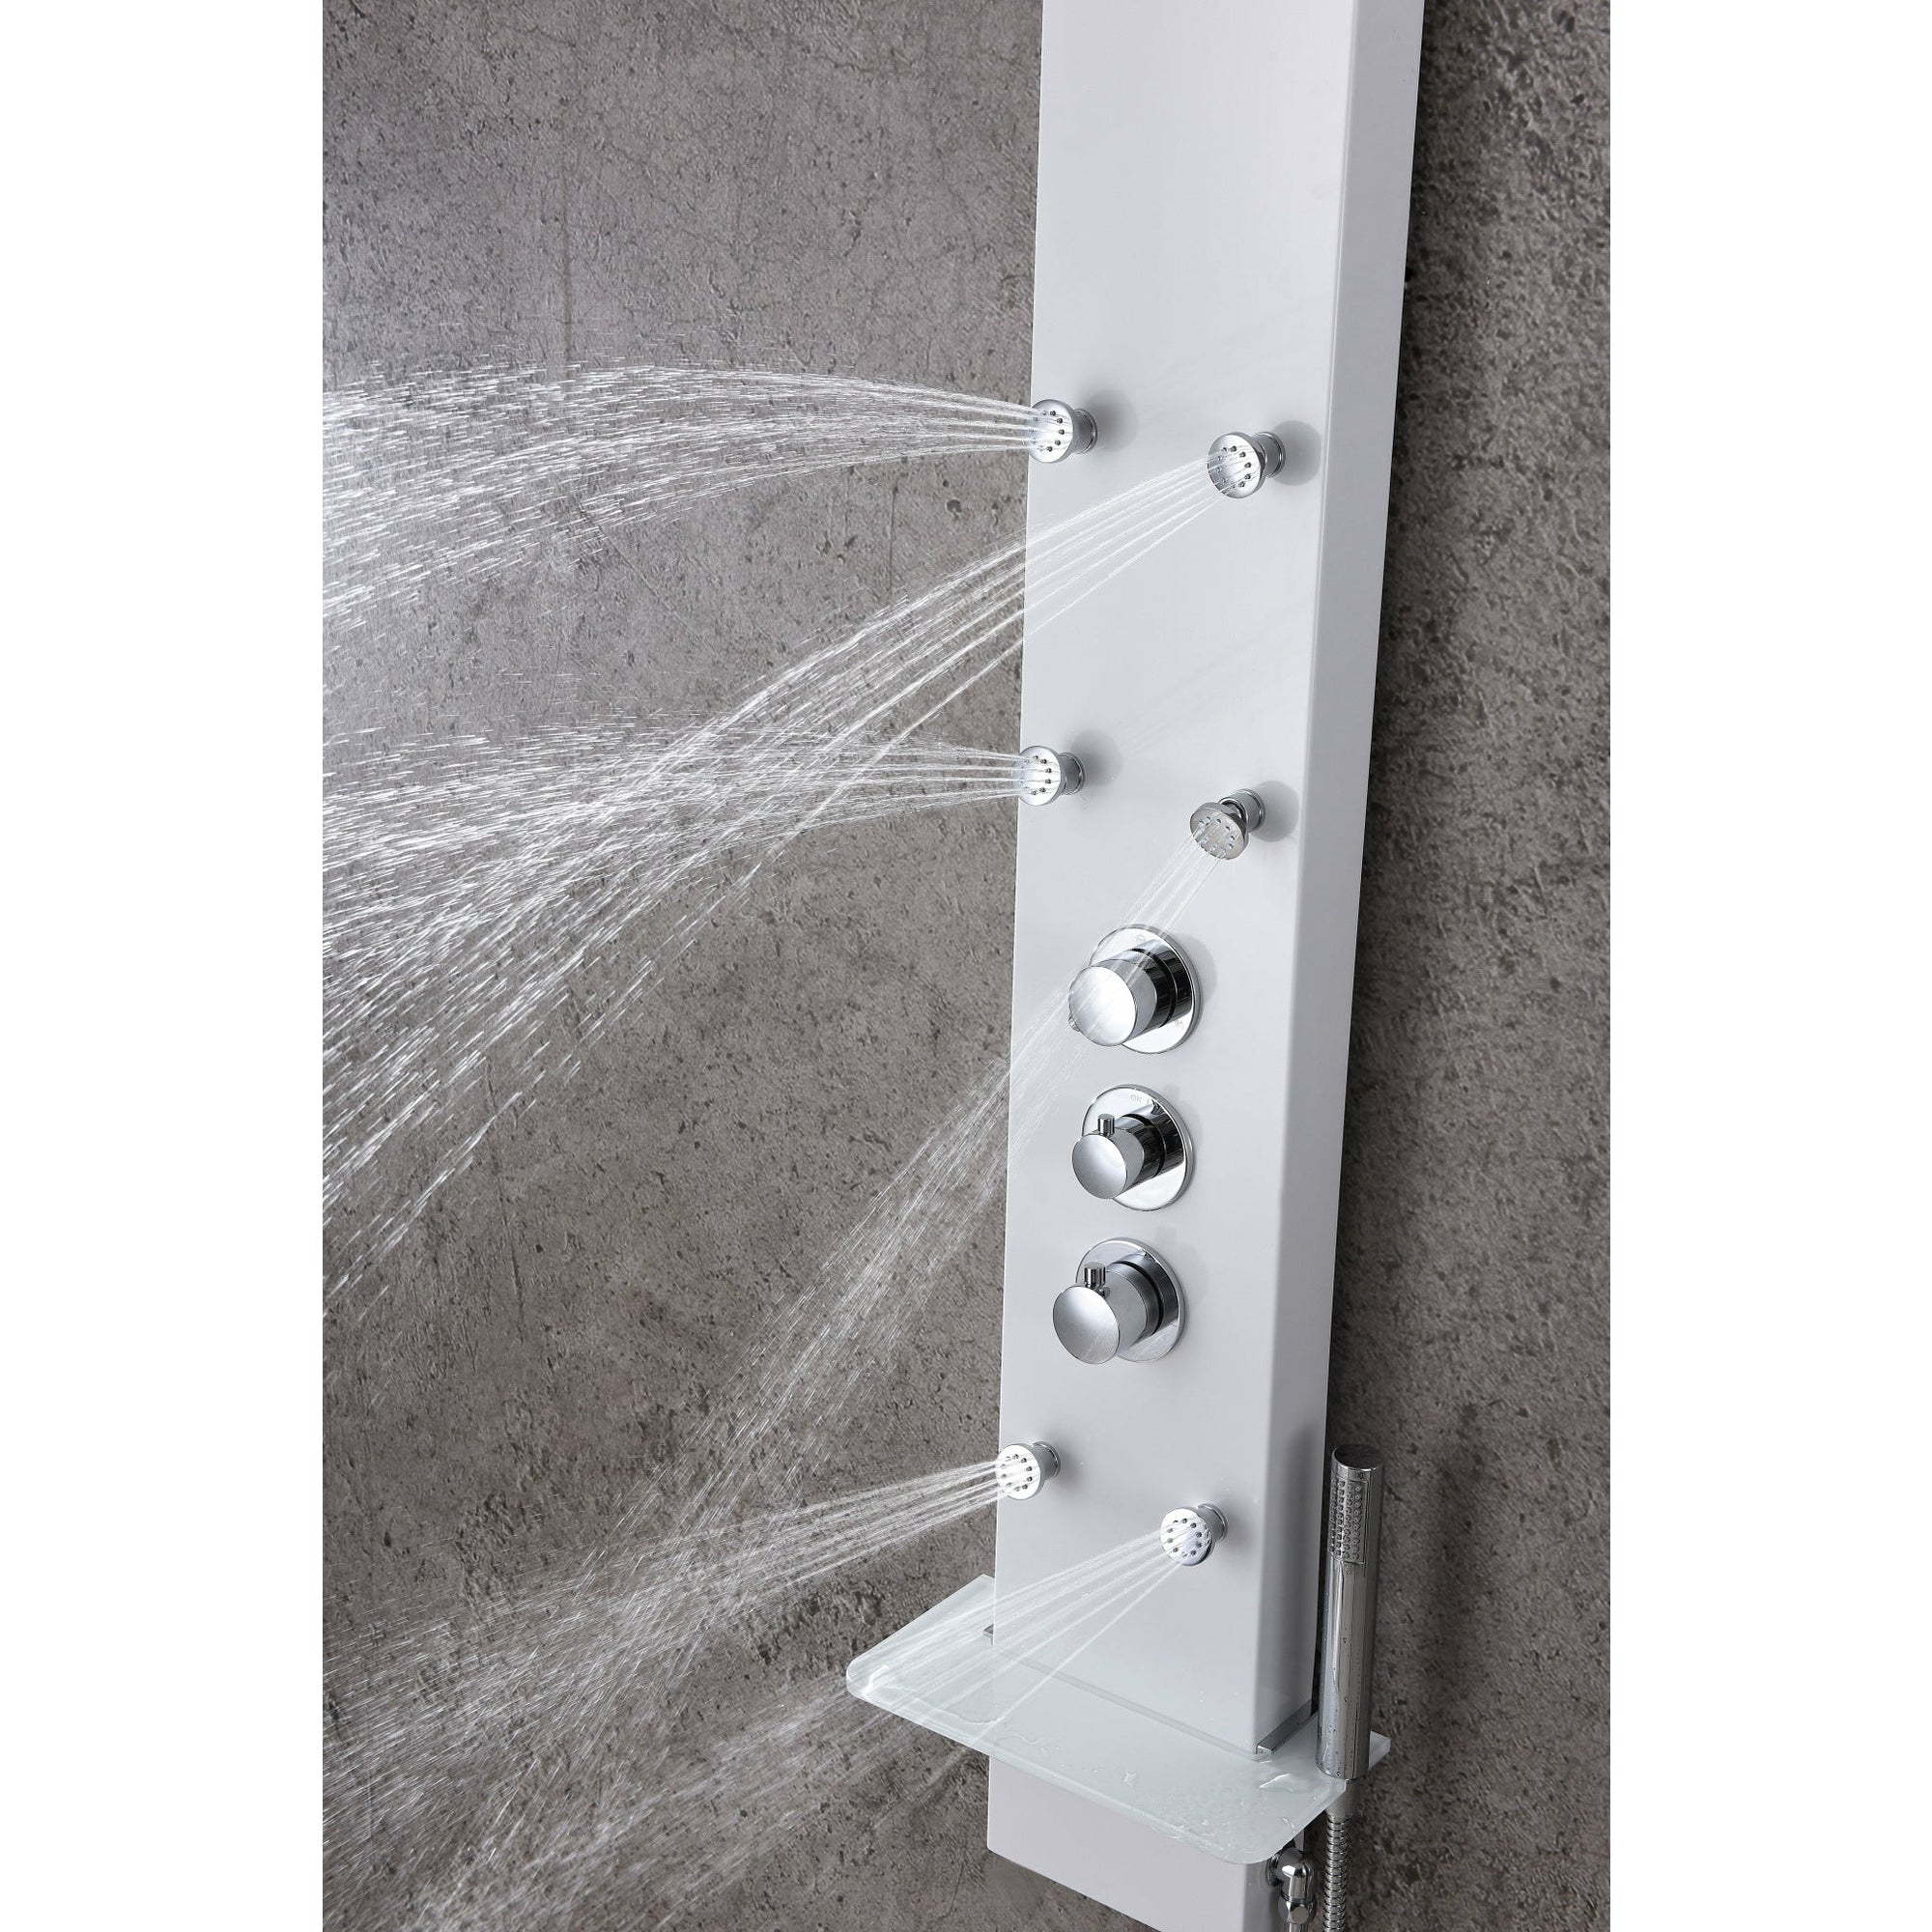 Anzzi Panther 60 Inch Full Body Shower Panel with Heavy Rain Shower Head, Six Directional Acu-stream Body Jets, Three Shower Control Knobs and Euro-grip Free Range Hand Sprayer in White Deco-glass Body SP-AZ8088 - Vital Hydrotherapy